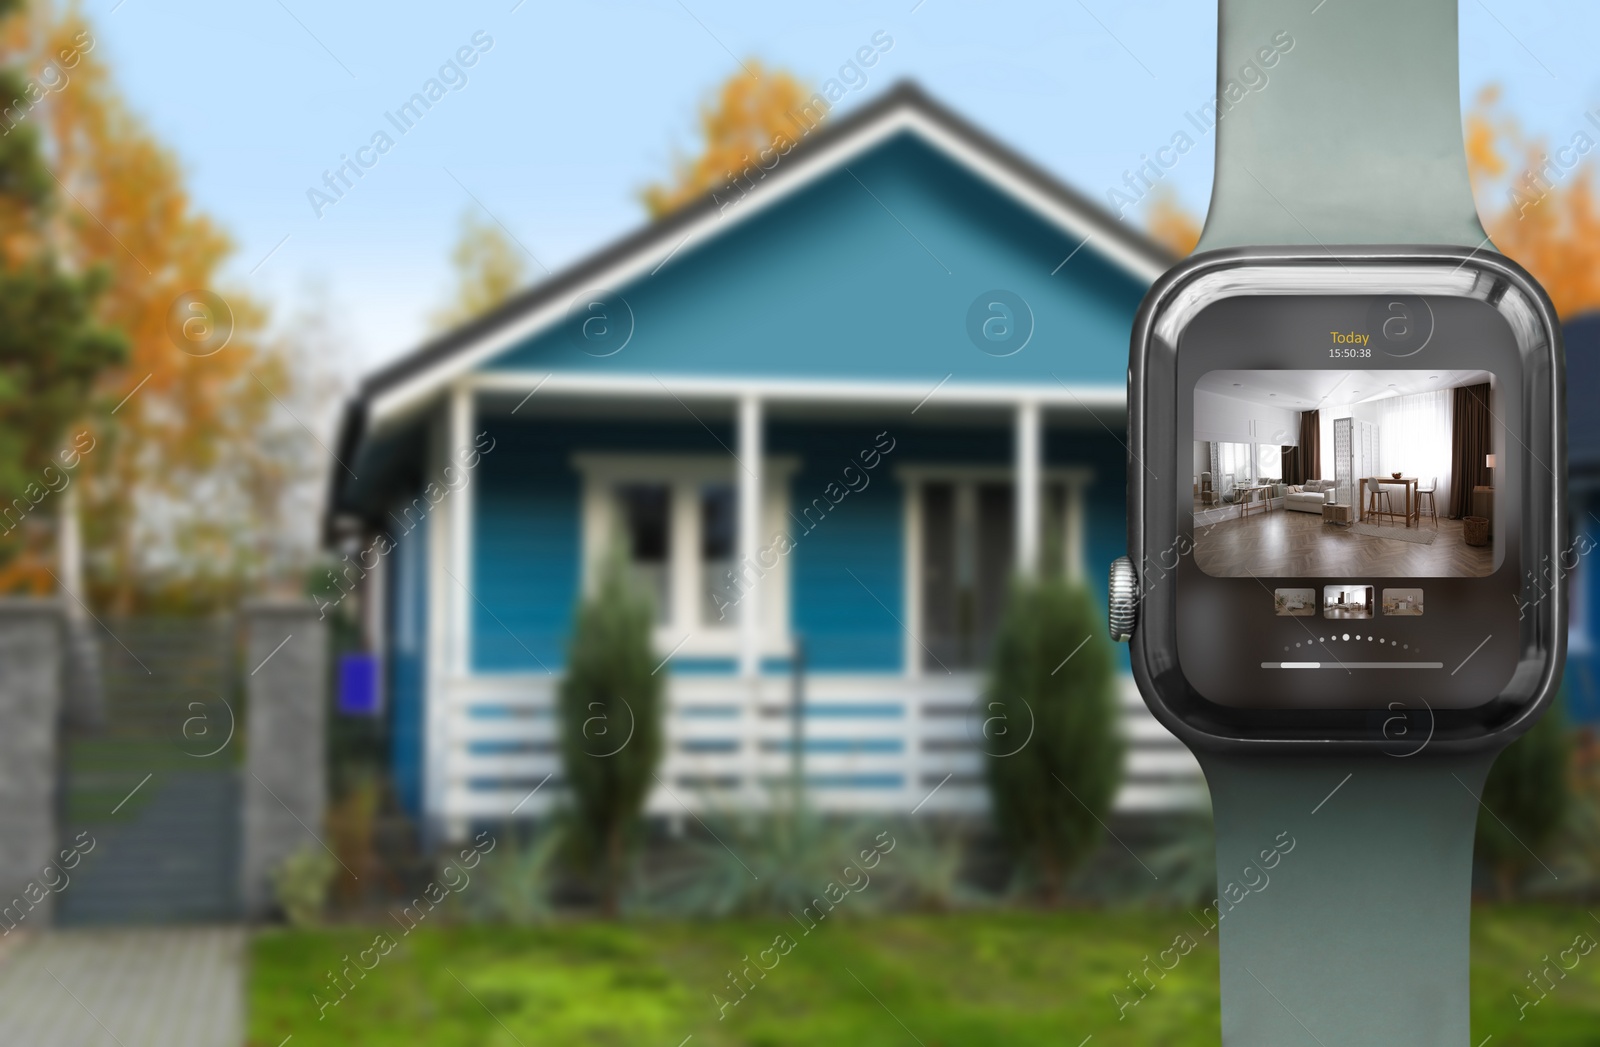 Image of Home security system. Modern smartwatch with image of room through CCTV camera on display against house, collage design